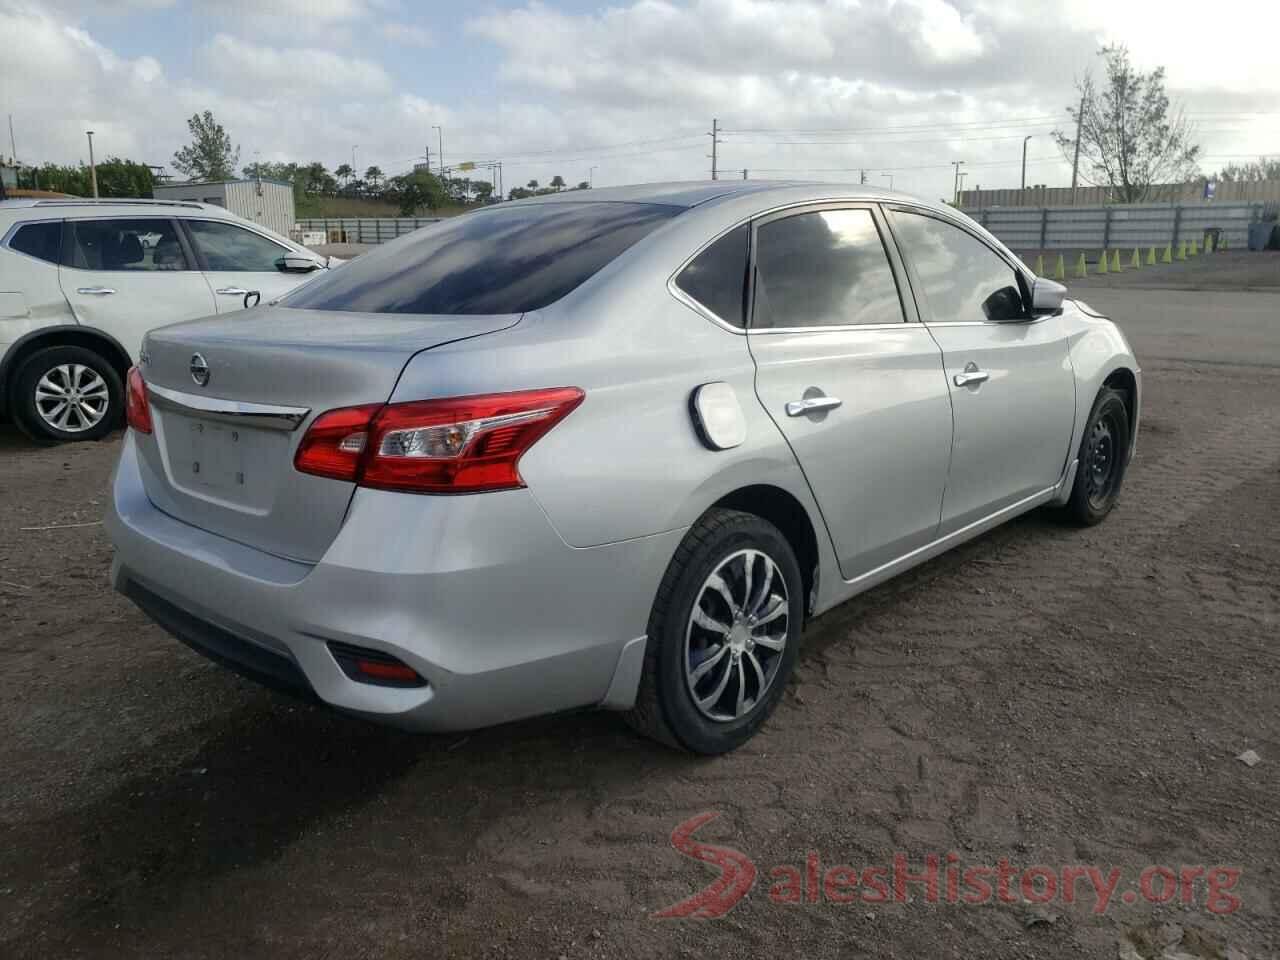 3N1AB7APXGY285862 2016 NISSAN SENTRA